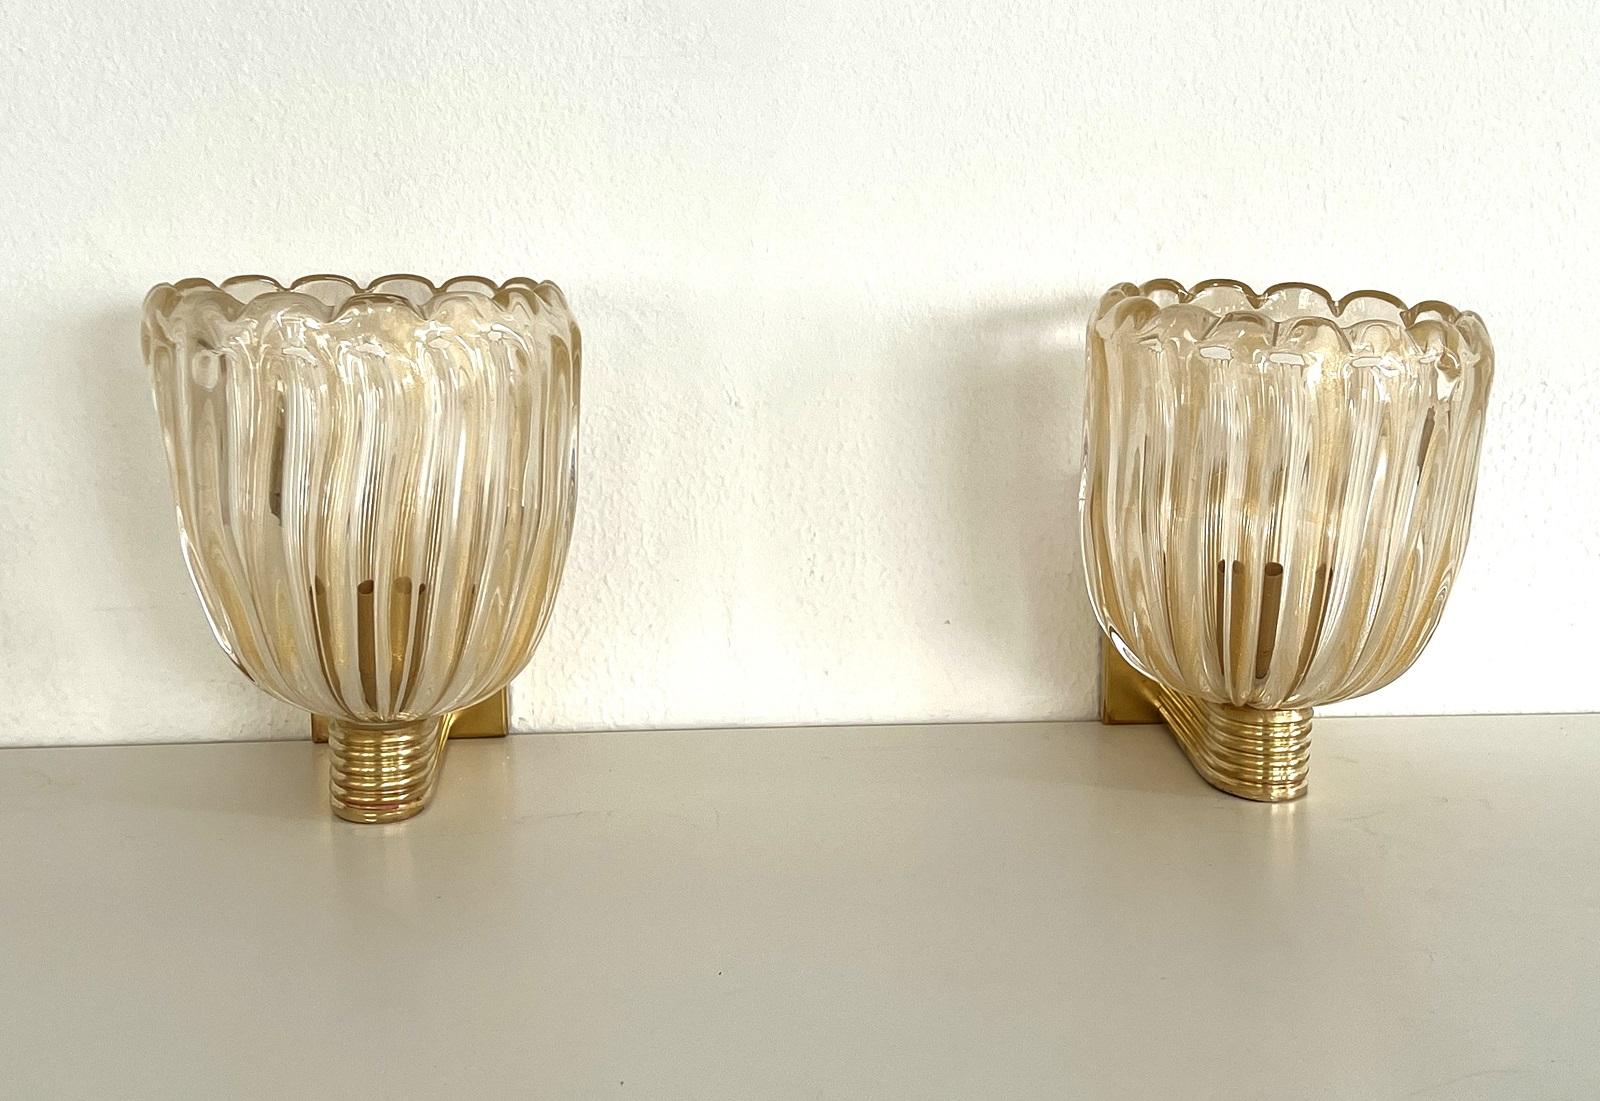 20th Century Italian Brass and Murano Glass Wall Lights or Sconces in Art Deco Style, 1990s For Sale